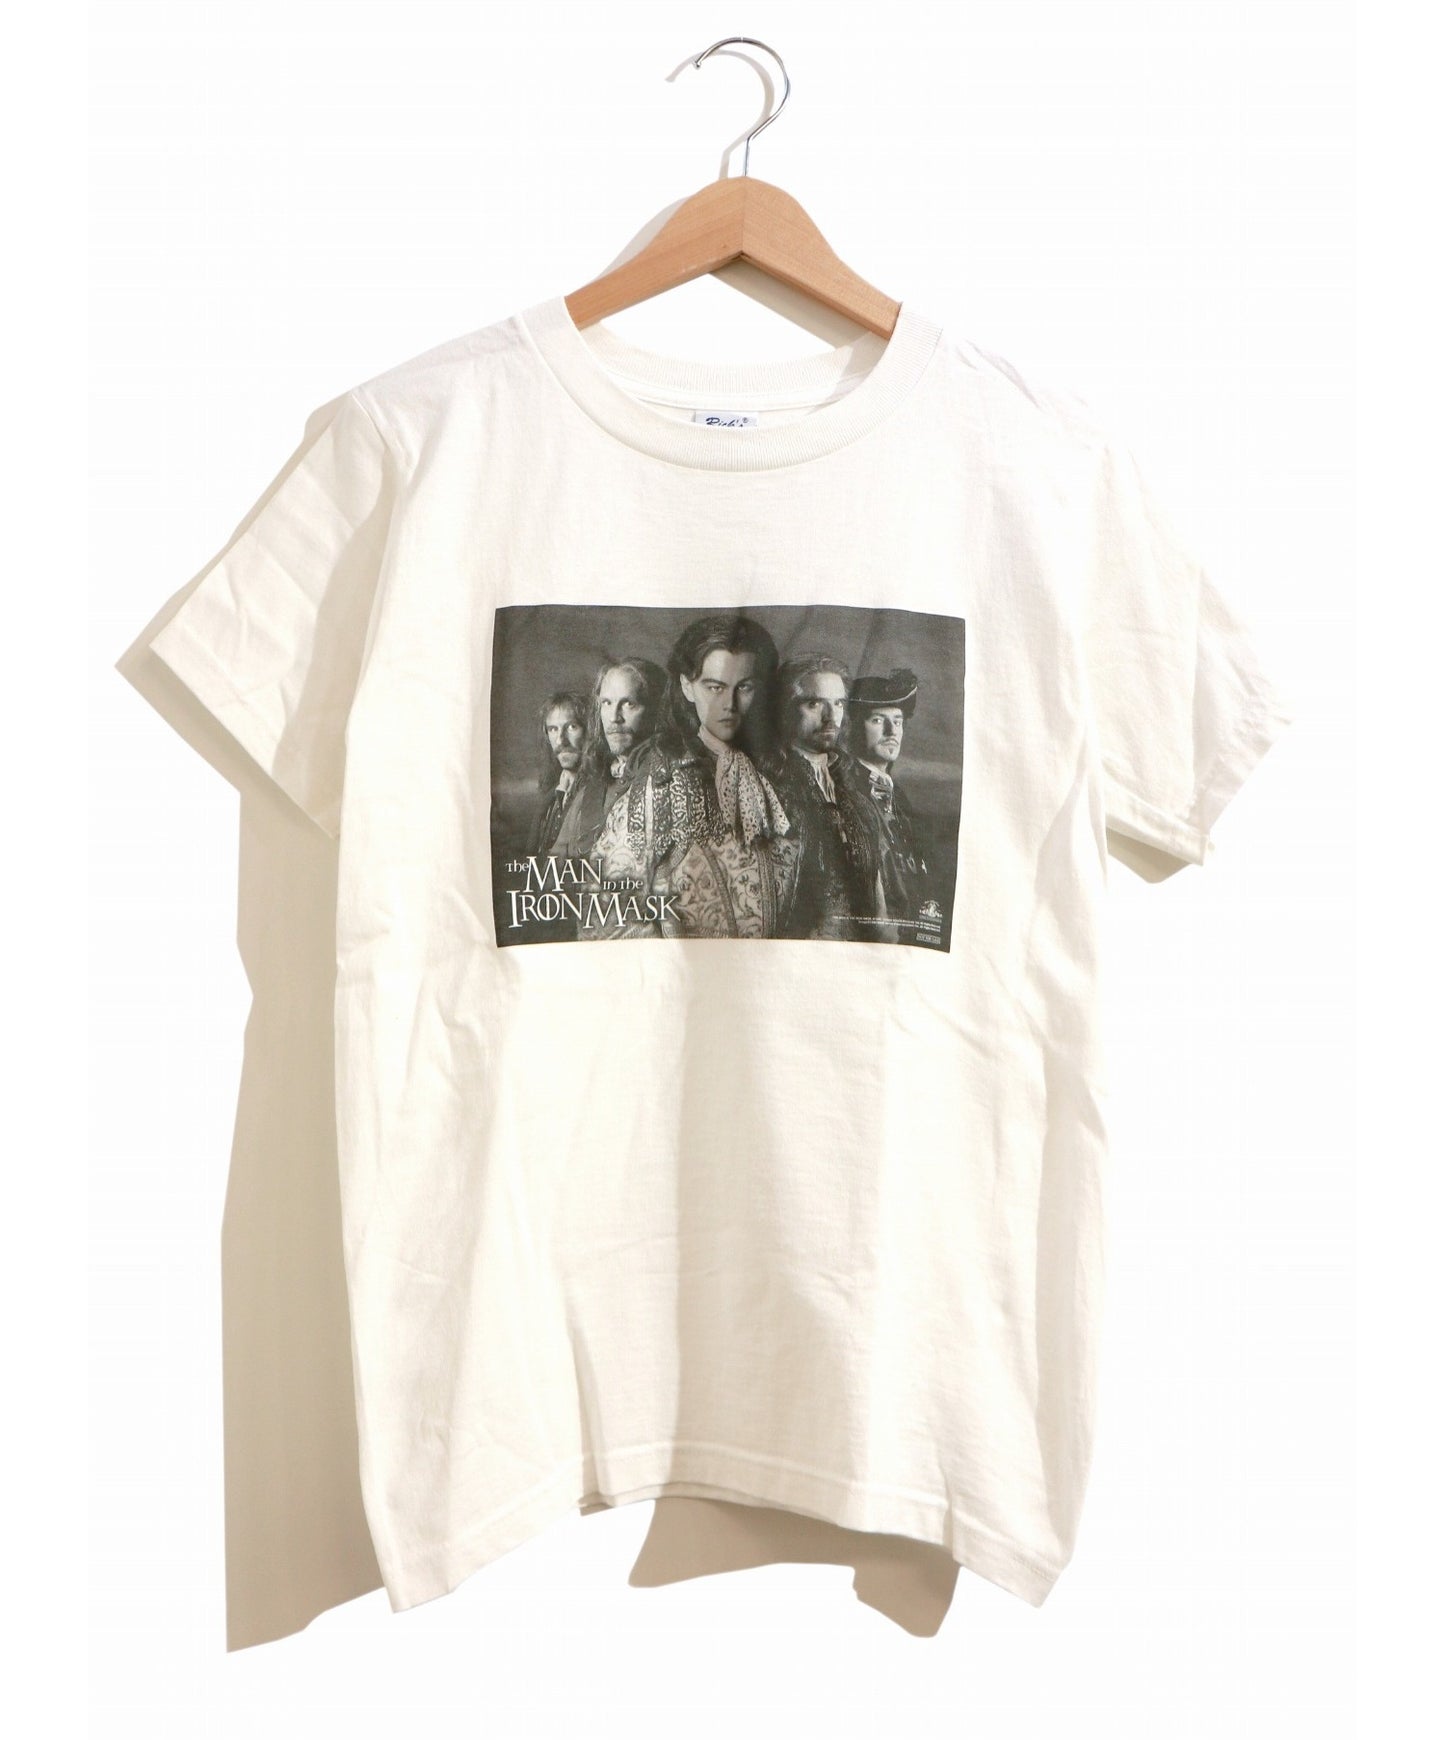 [Vintage Clothes] THE MAN IN THE IRON MASK Cinema T-Shirt